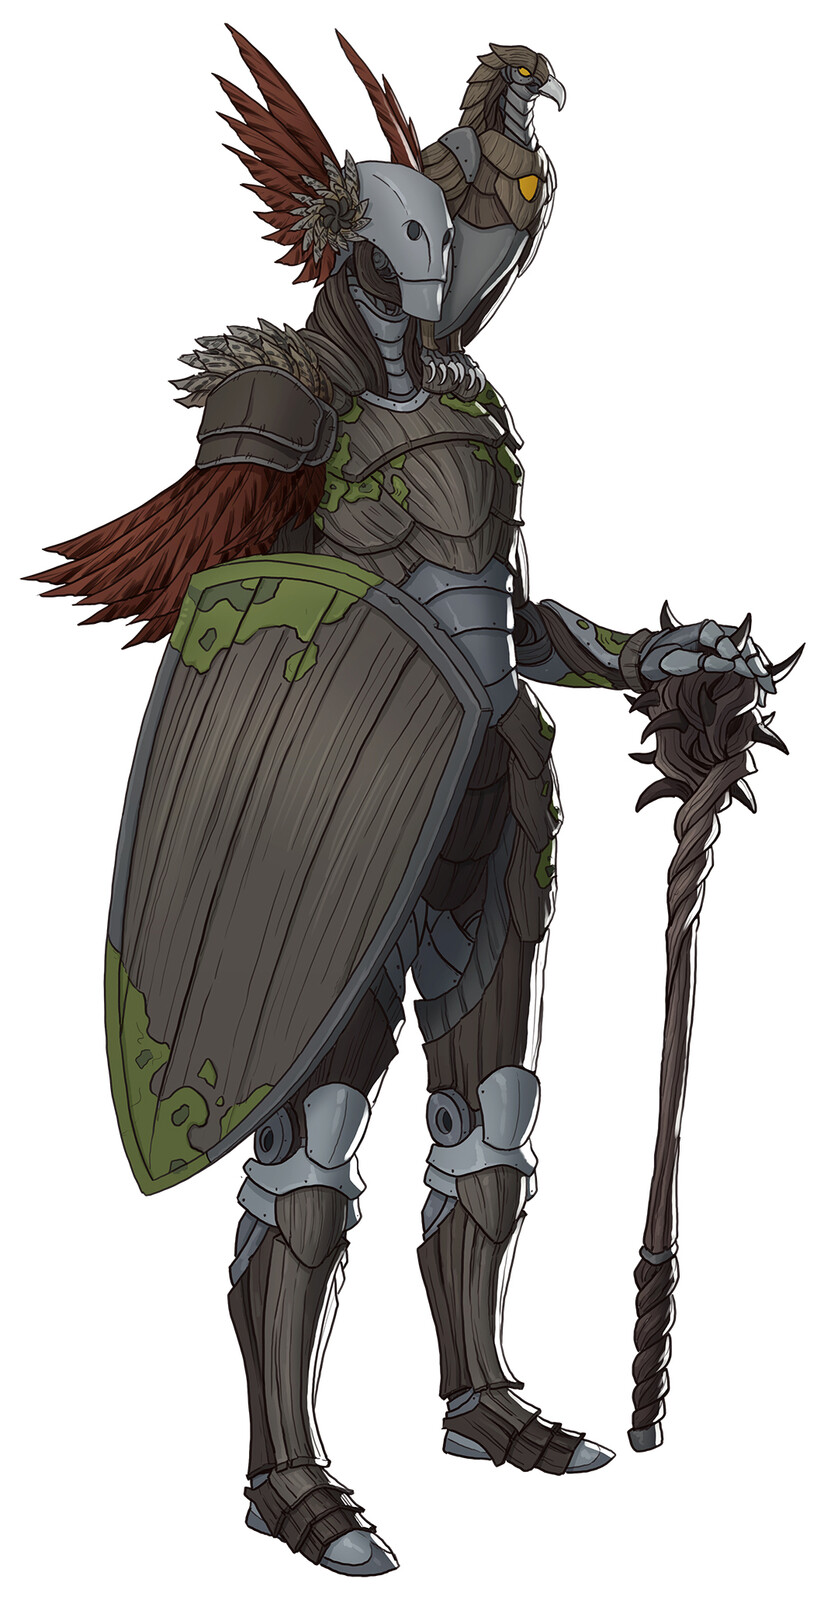 Feather, Warforged Battlesmith Artificer / Paladin of the Ancients.